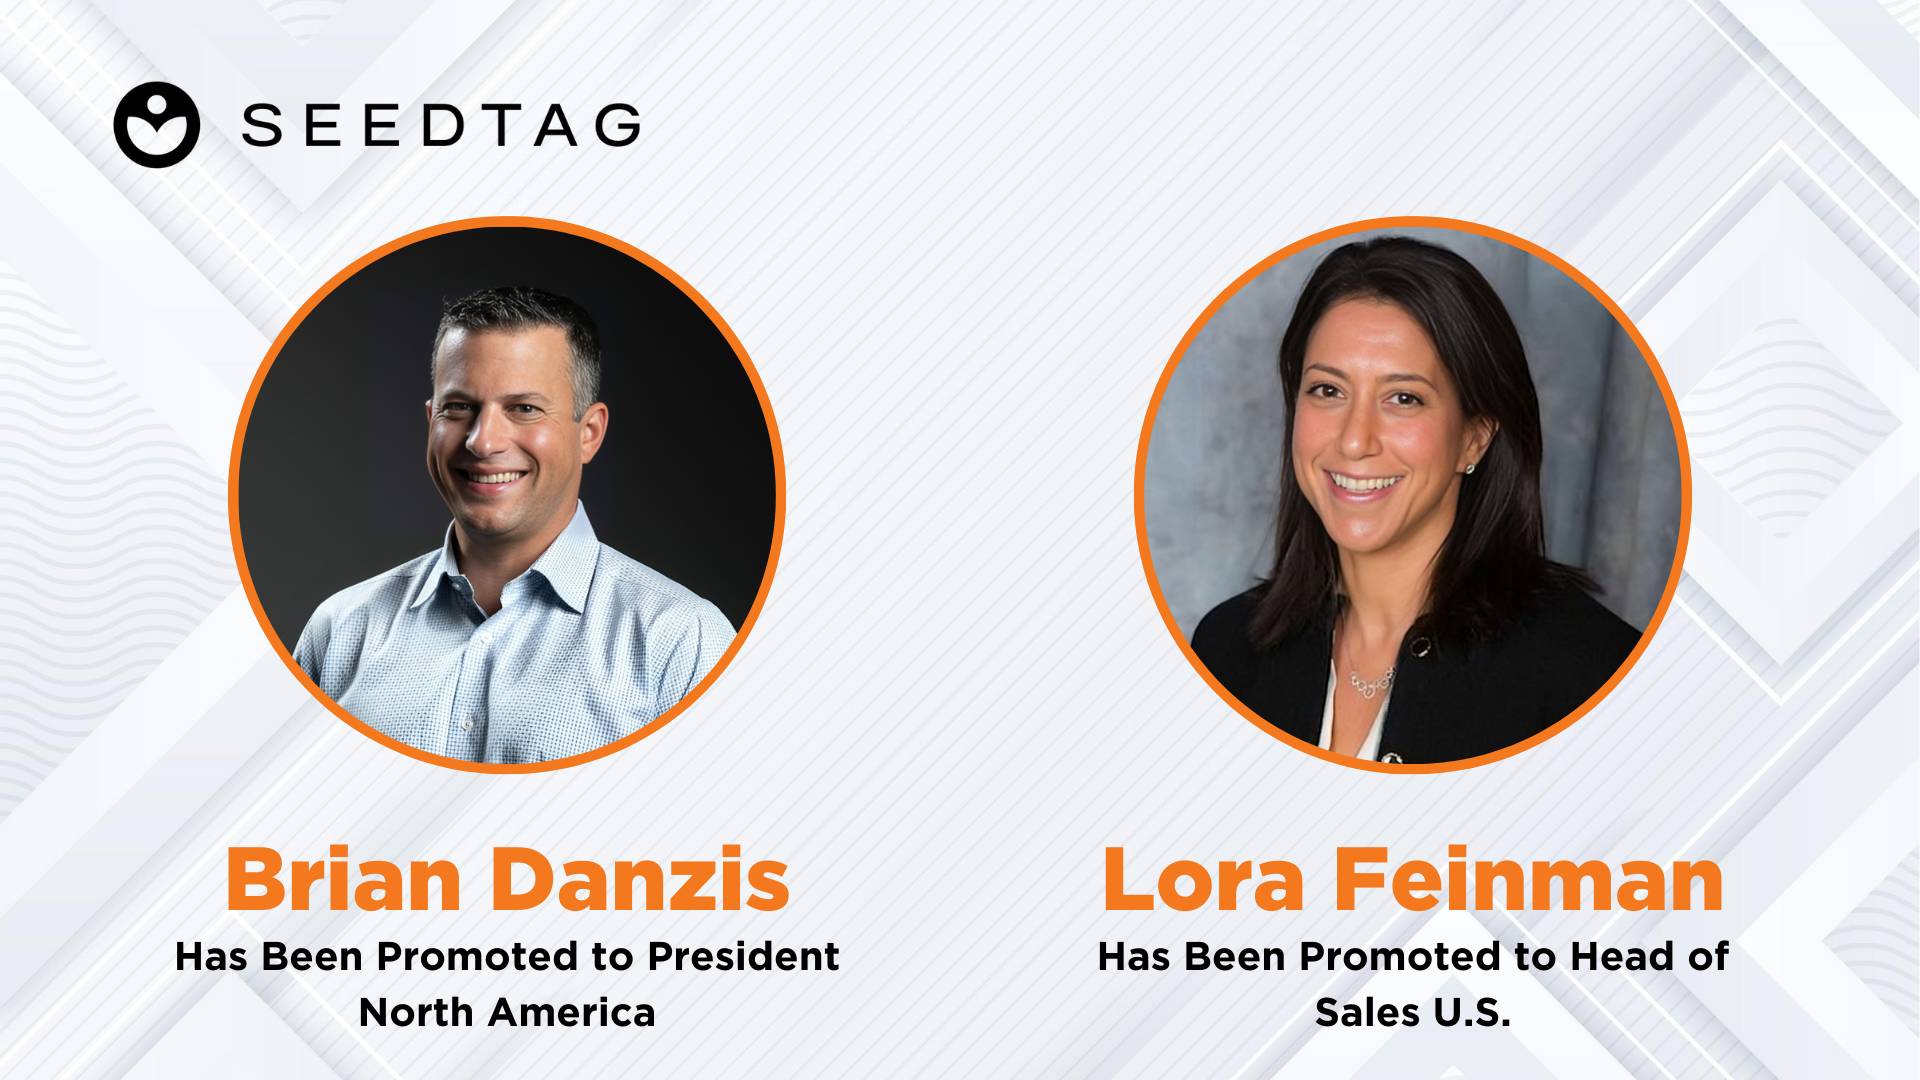 Seedtag Appoints Brian Danzis to President North America and Lora Feinman to Head of Sales U.S. While Expanding Markets and Achieving 850% YoY Revenue Growth